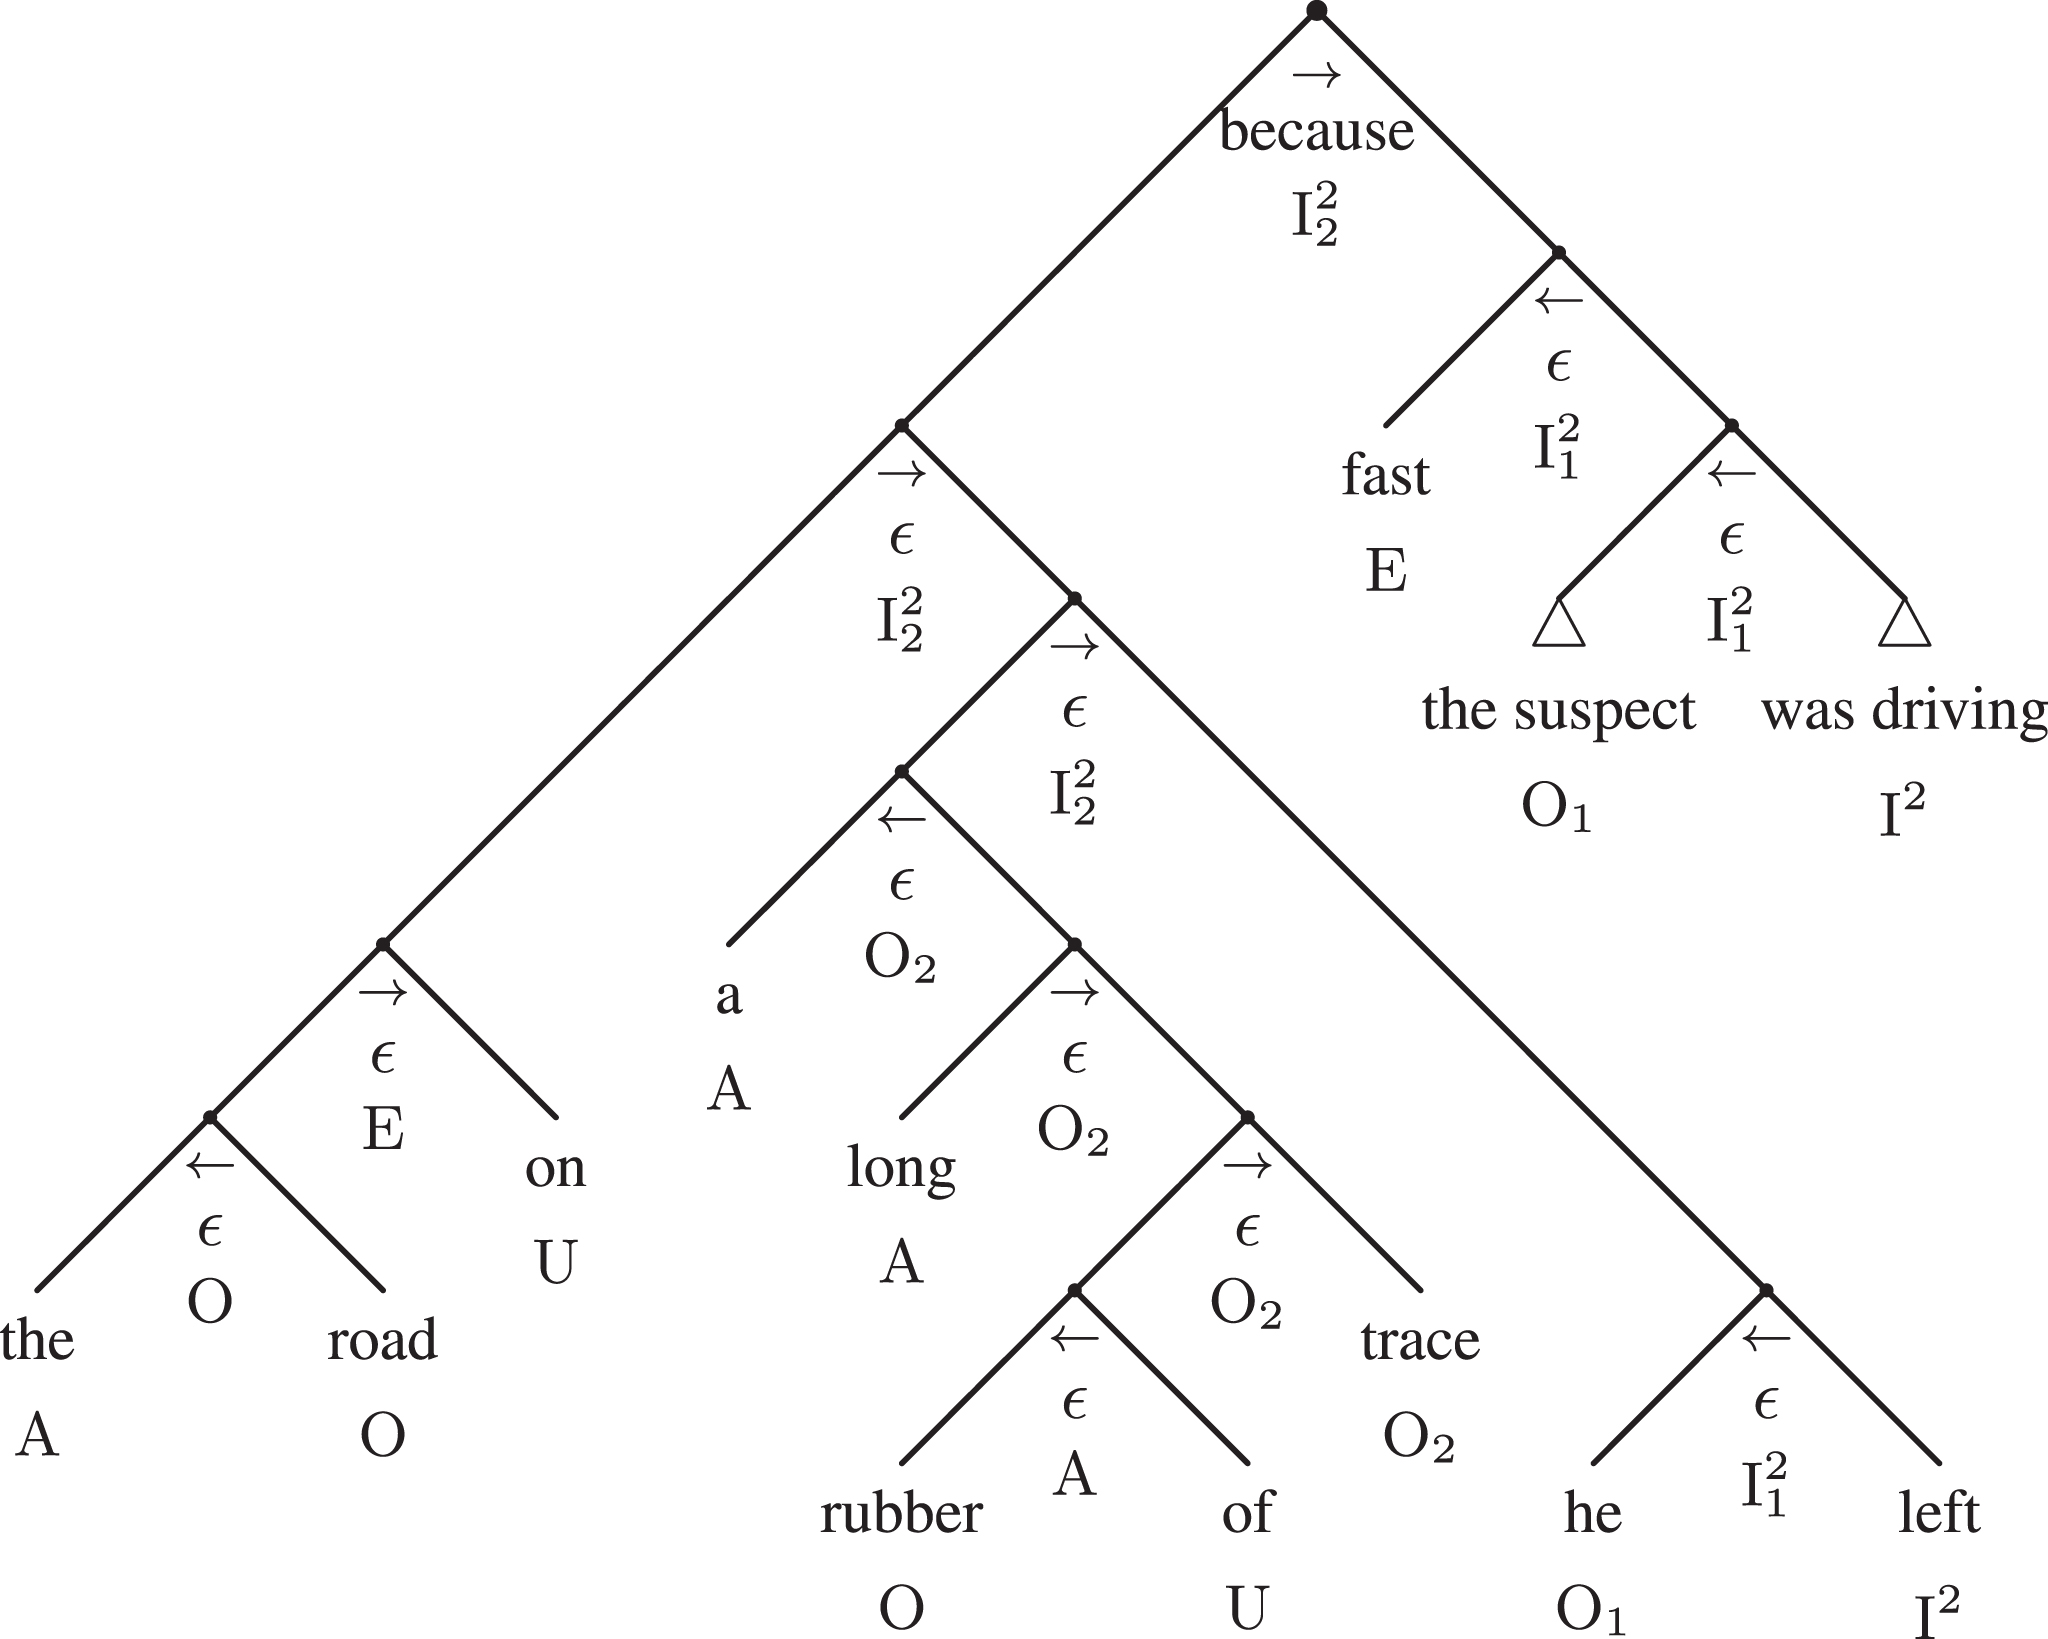 The fully expanded syntactic adtree of example 1.